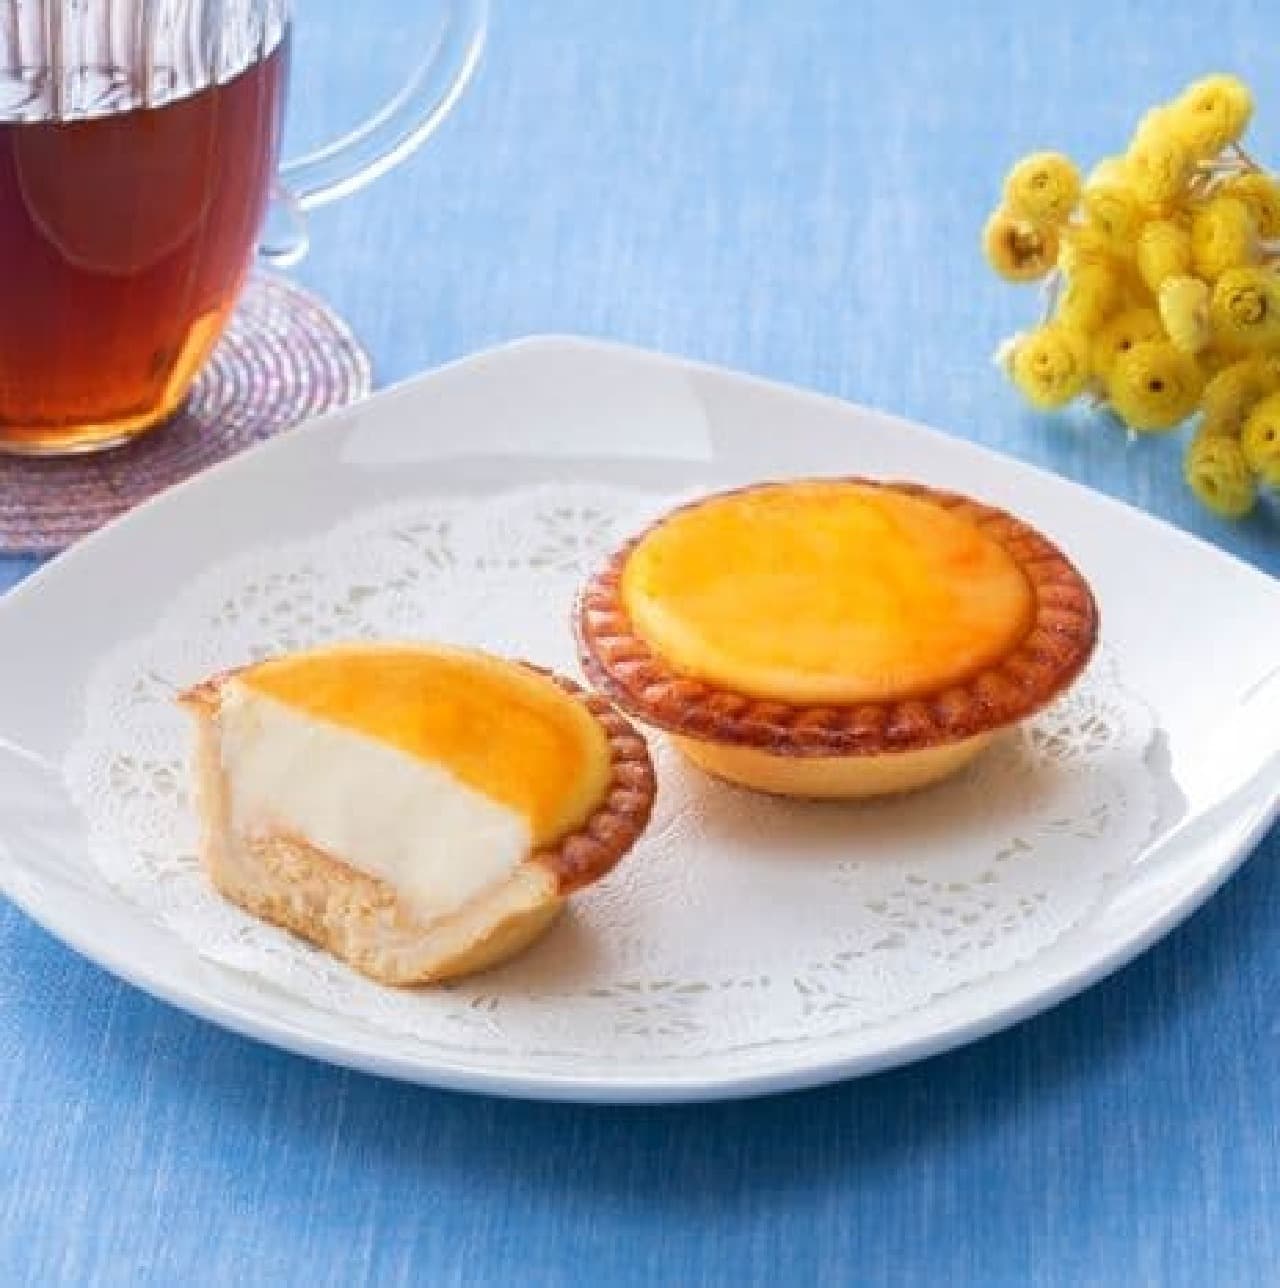 FamilyMart "Butter-scented grilled cheese tart"